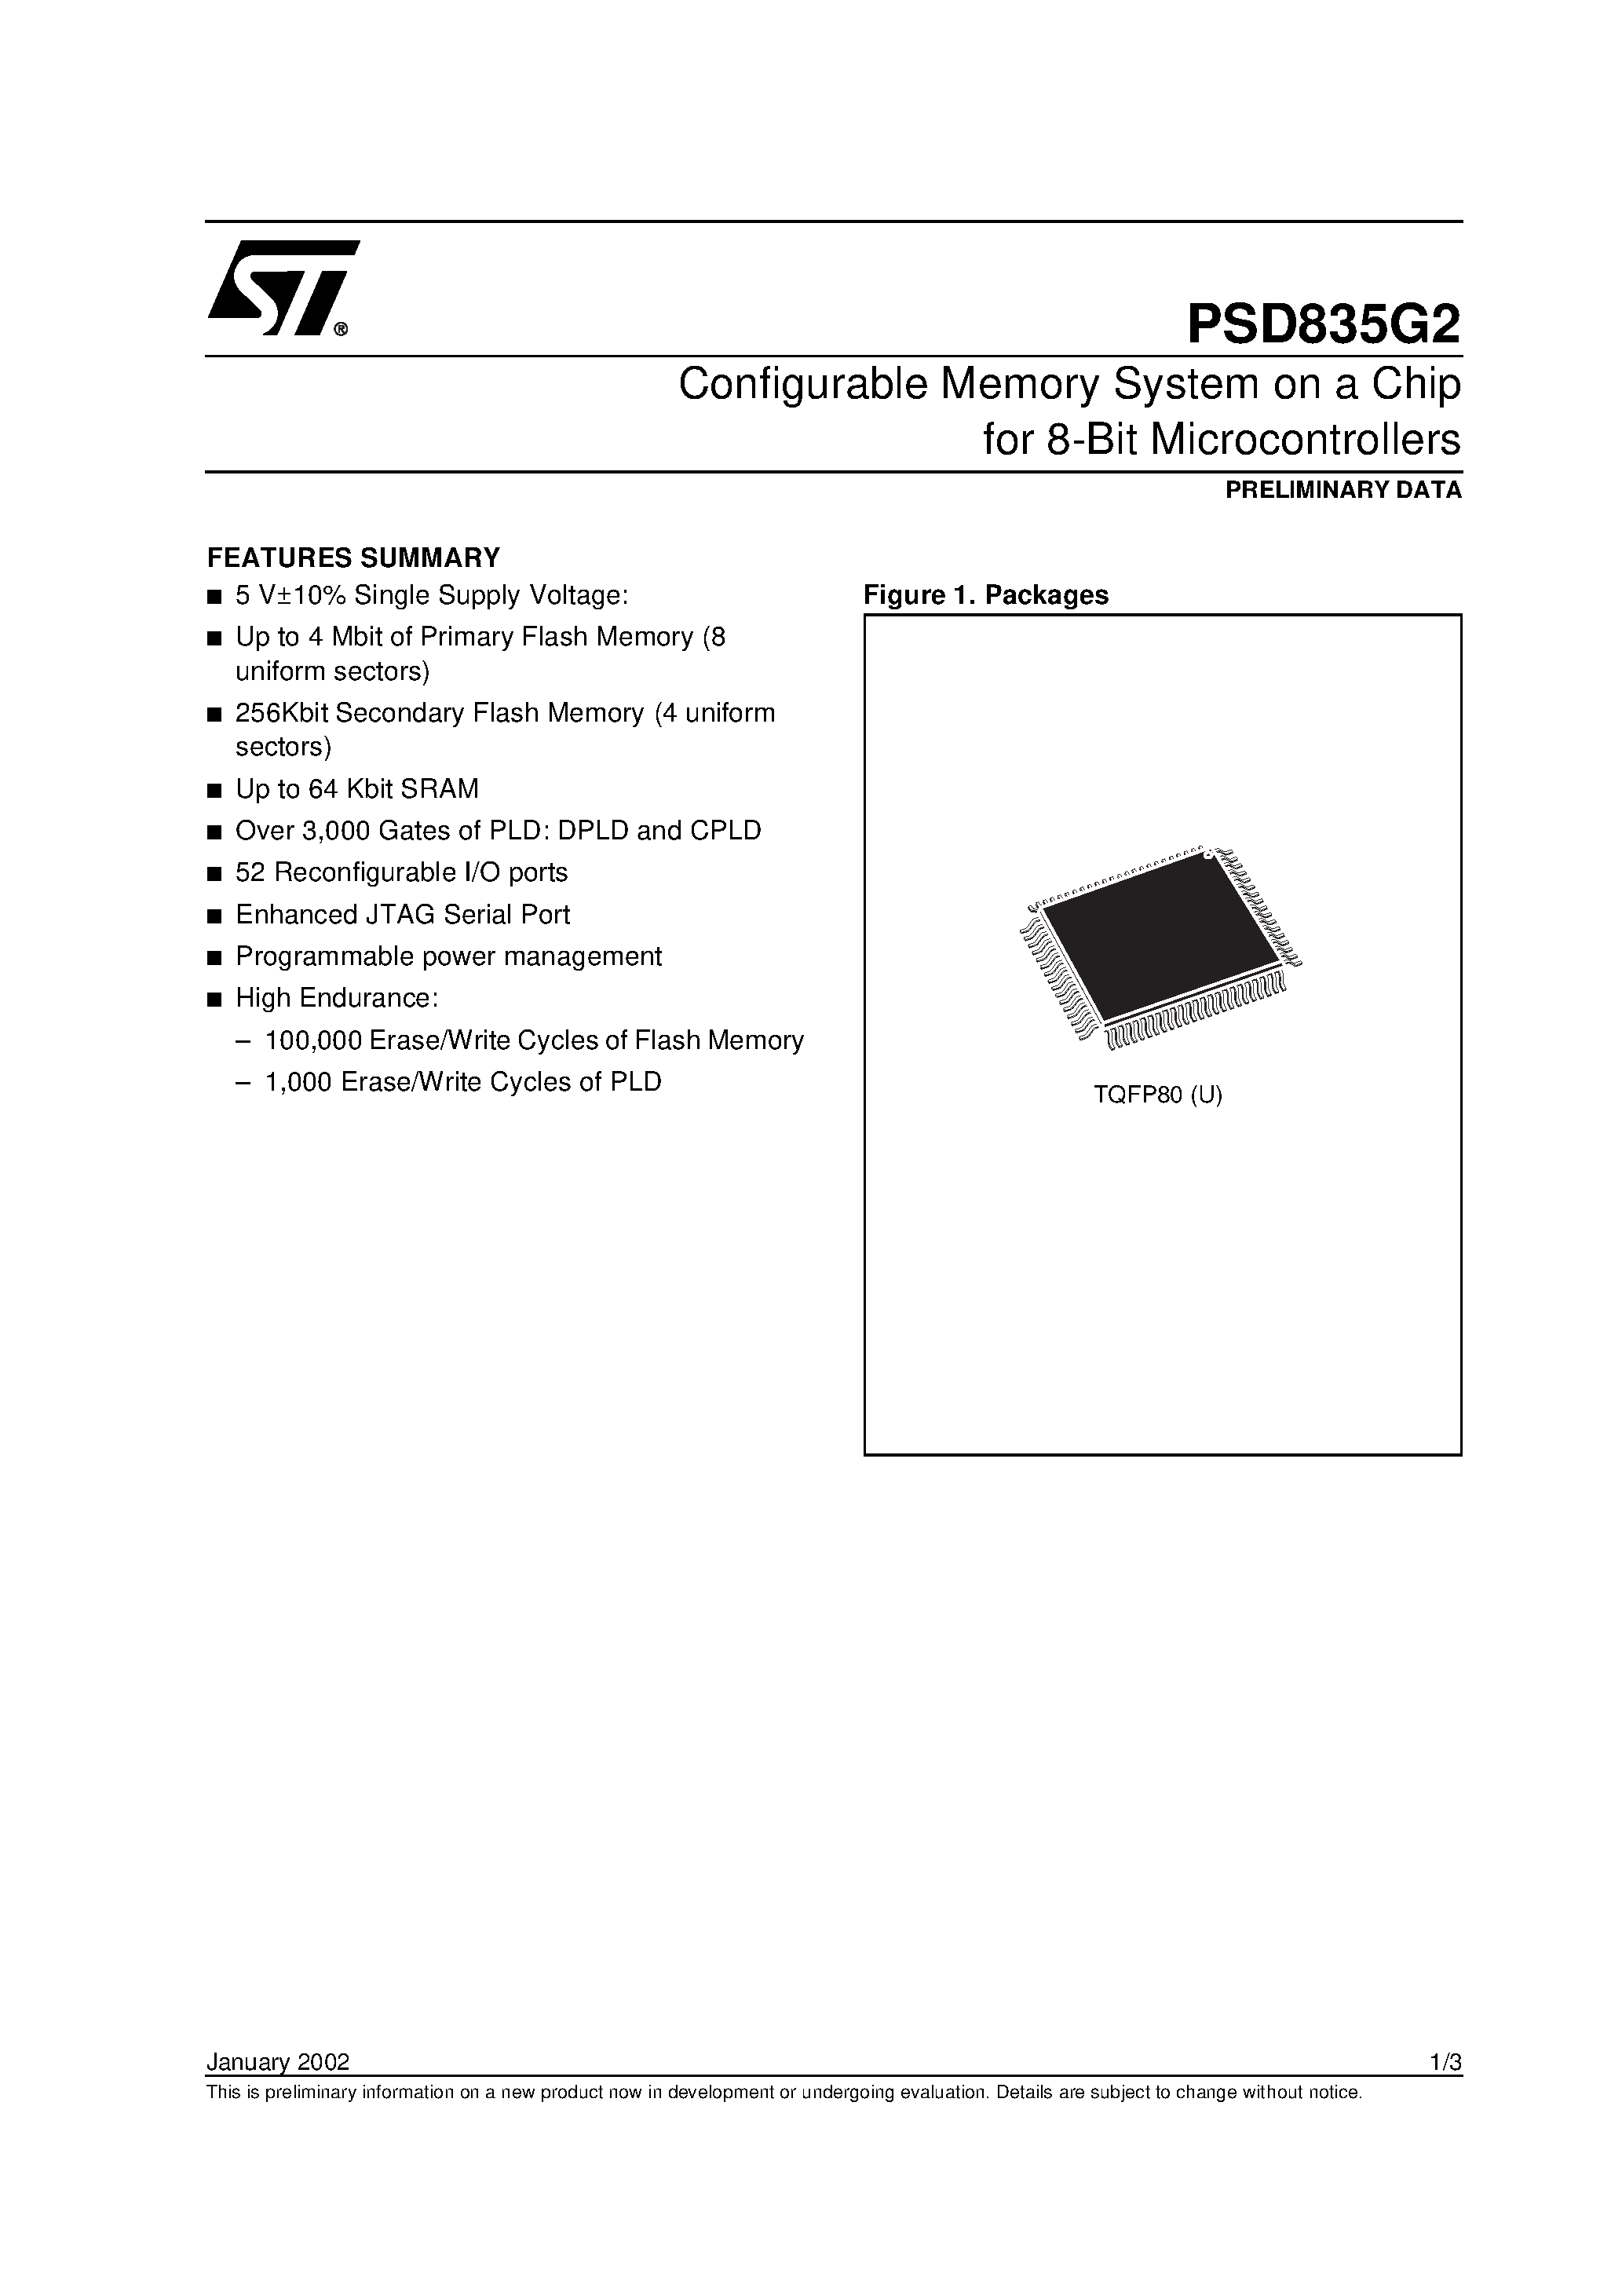 Datasheet PSD835F1-A-12JI - Configurable Memory System on a Chip for 8-Bit Microcontrollers page 1